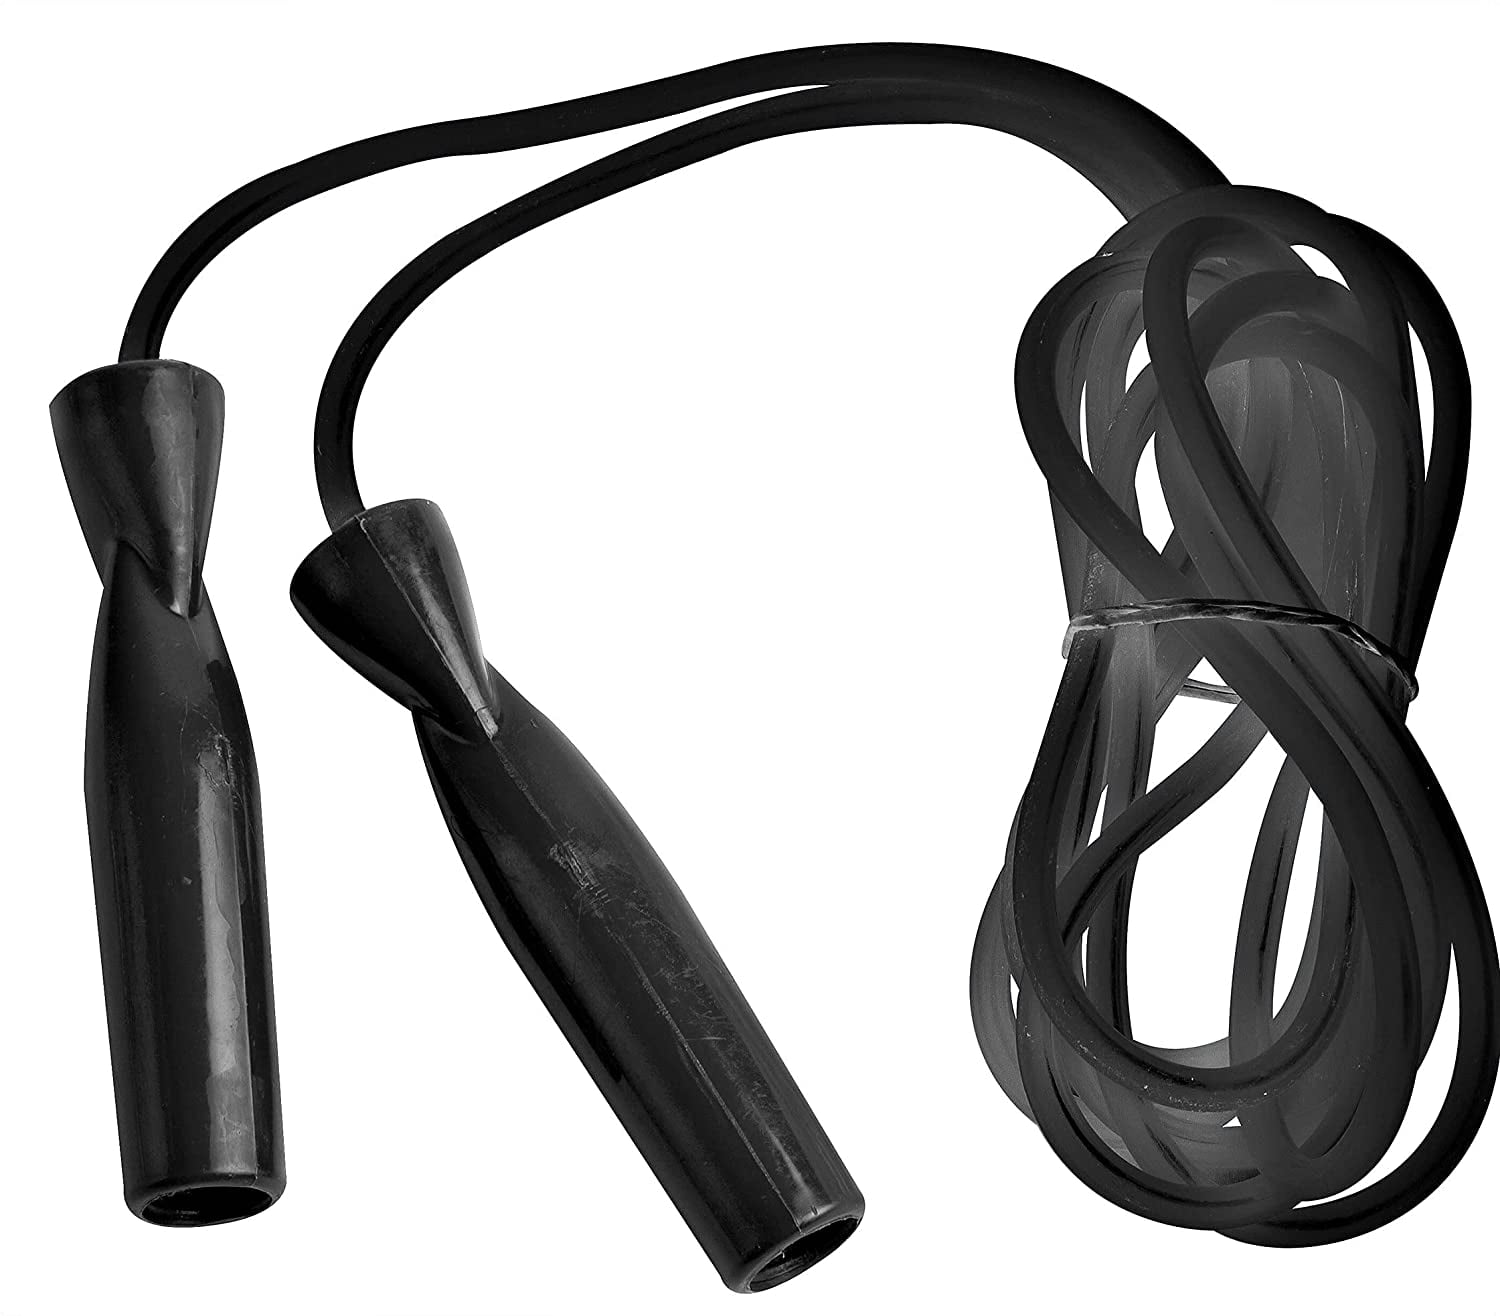 Details about   Skipping Rope Adjustable Jumping Fitness Wireless Smart Rope Training w/ APP US